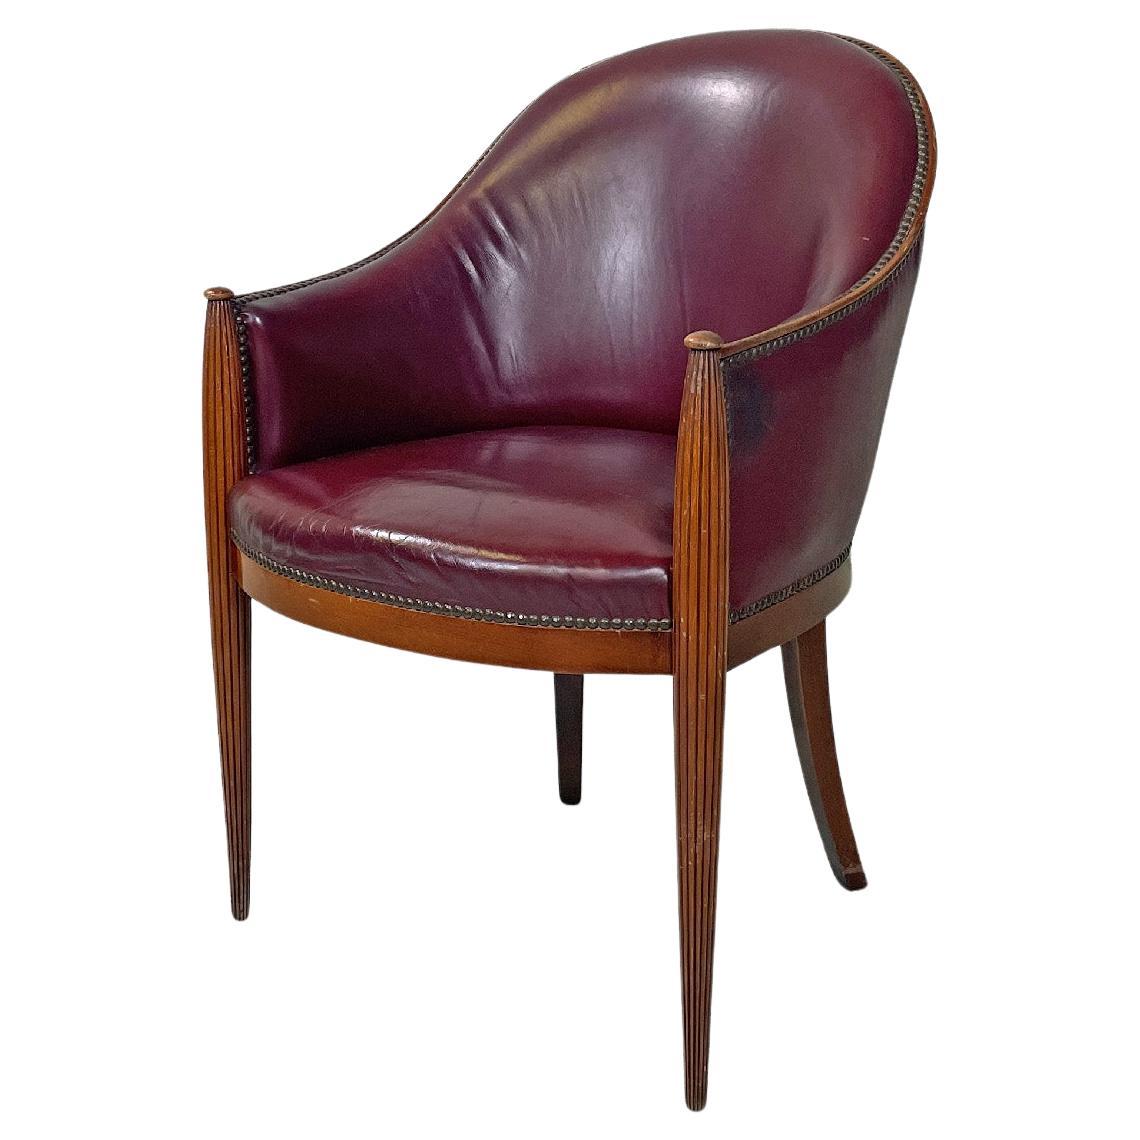 Italian mid-century modern wine-colored leather armchair with studs, 1950s